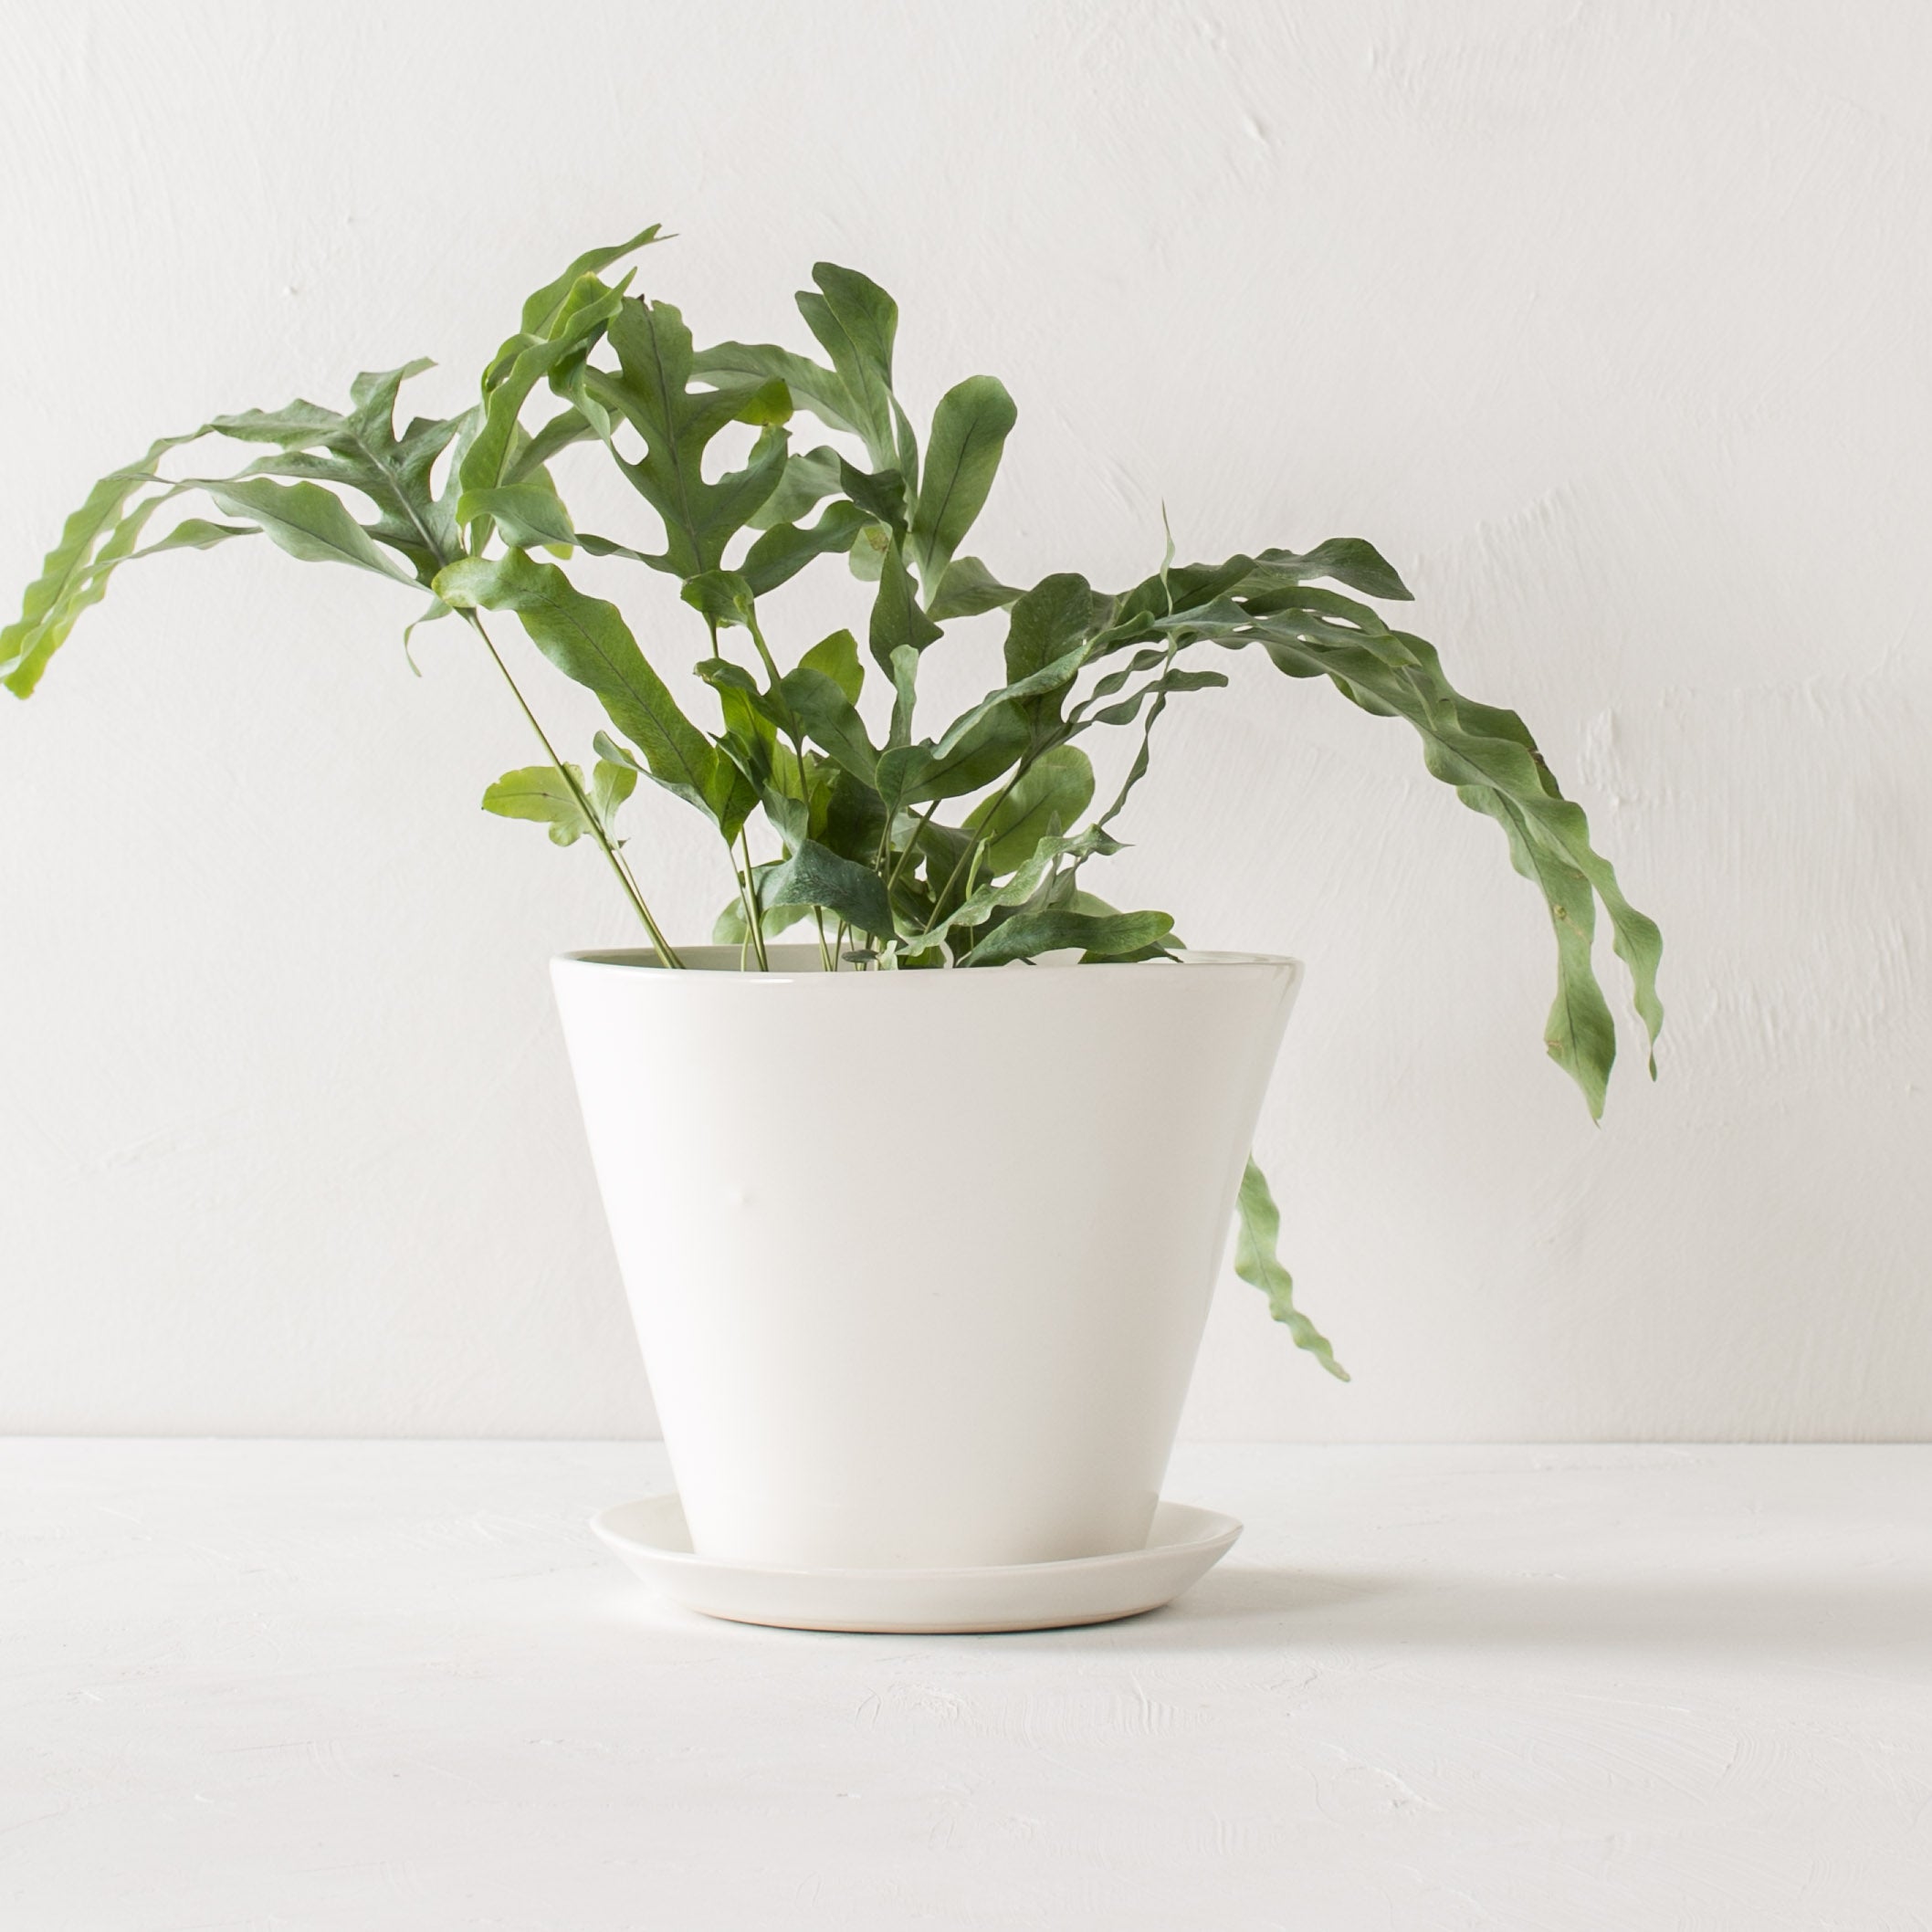 Minimal white 7 inch tapered planters with plant inside with bottom drainage dish. Designed by Convivial Production, sold by Shop Verdant Kansas City plant store.